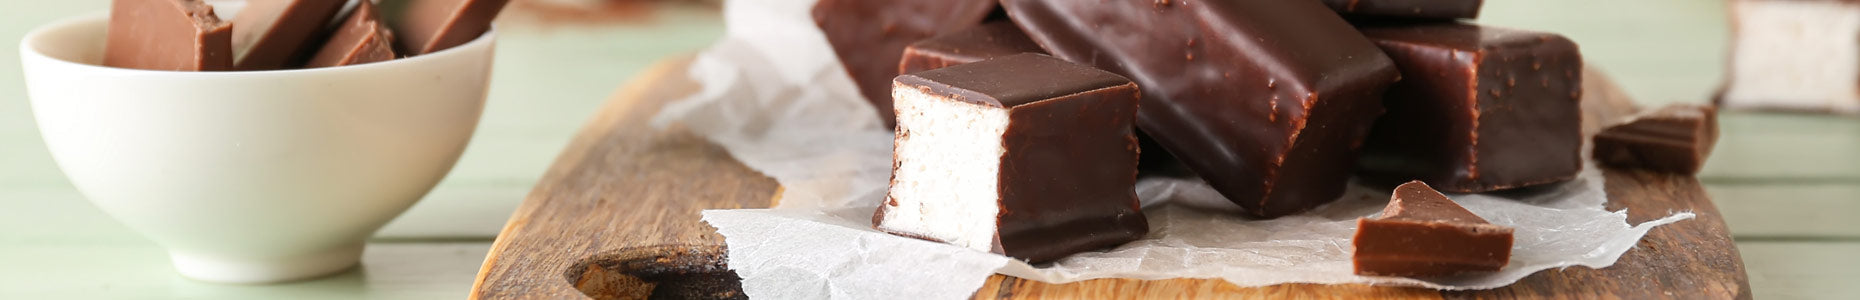 Chocolate Covered Marshmallows in Vanilla and Triple Chocolate flavors from Dilettante Mocha Café